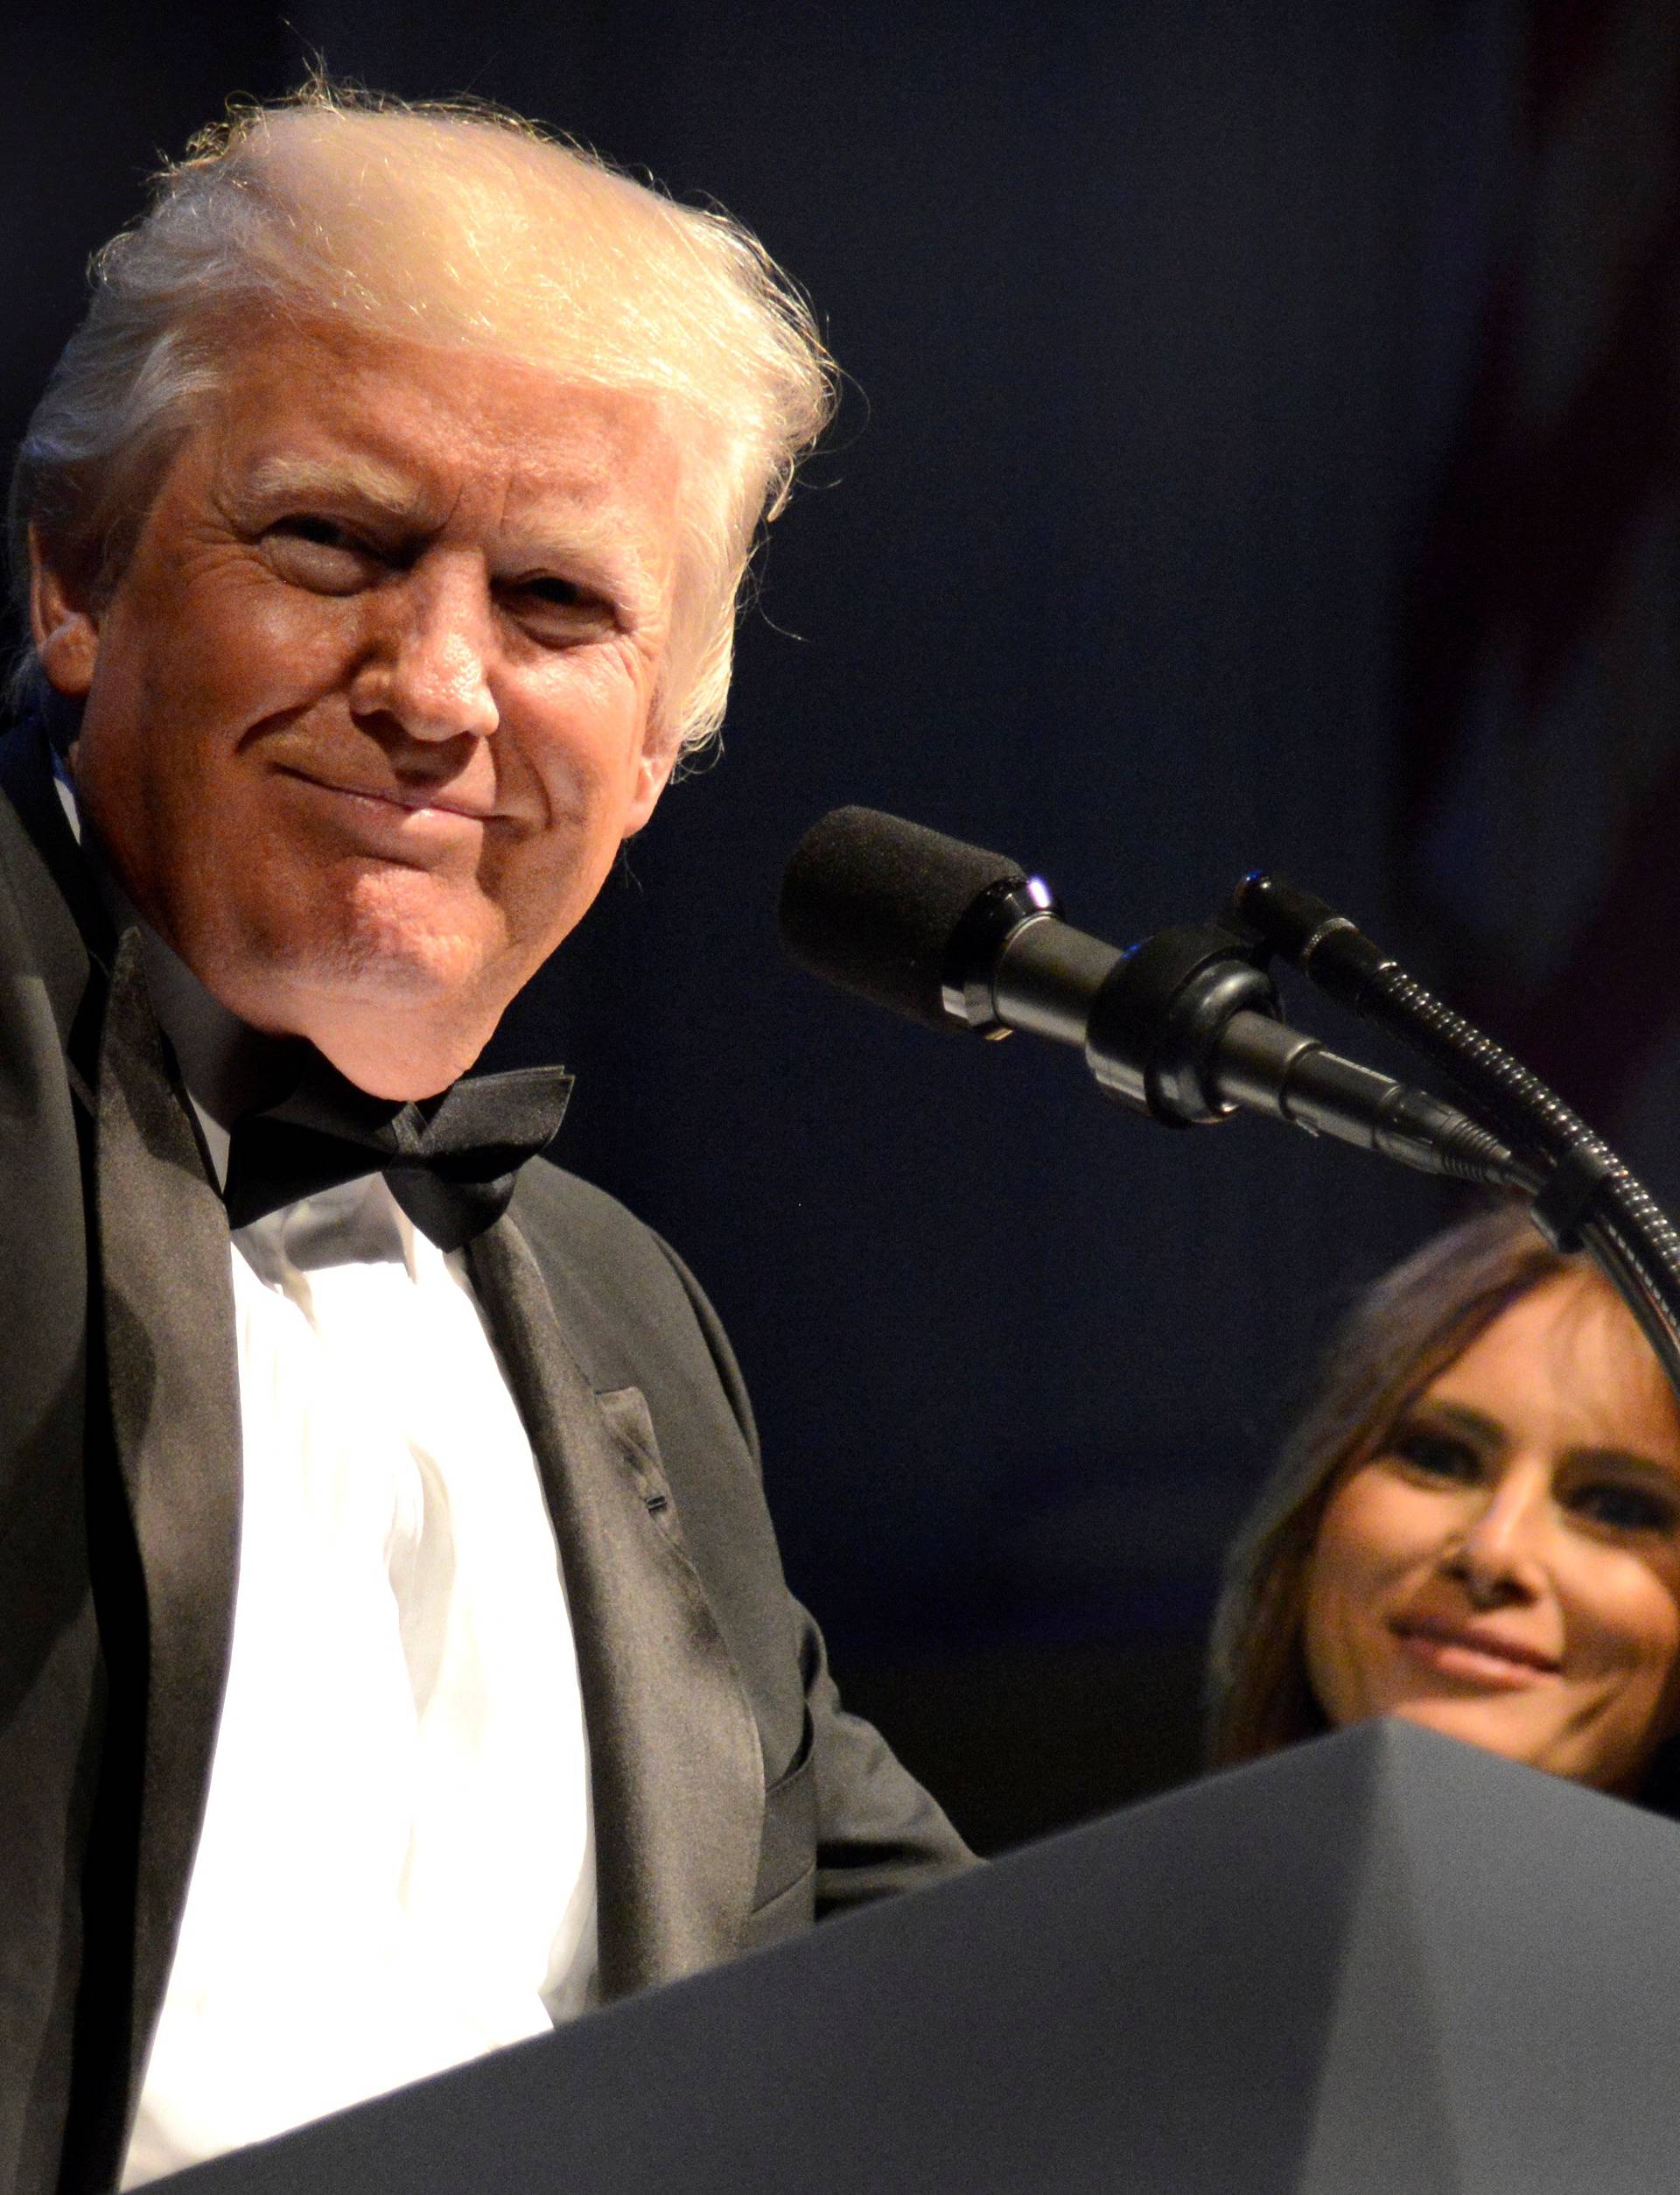 President Trump and First Lady Melania Trump attend Ford's Theatre Gala in Washington